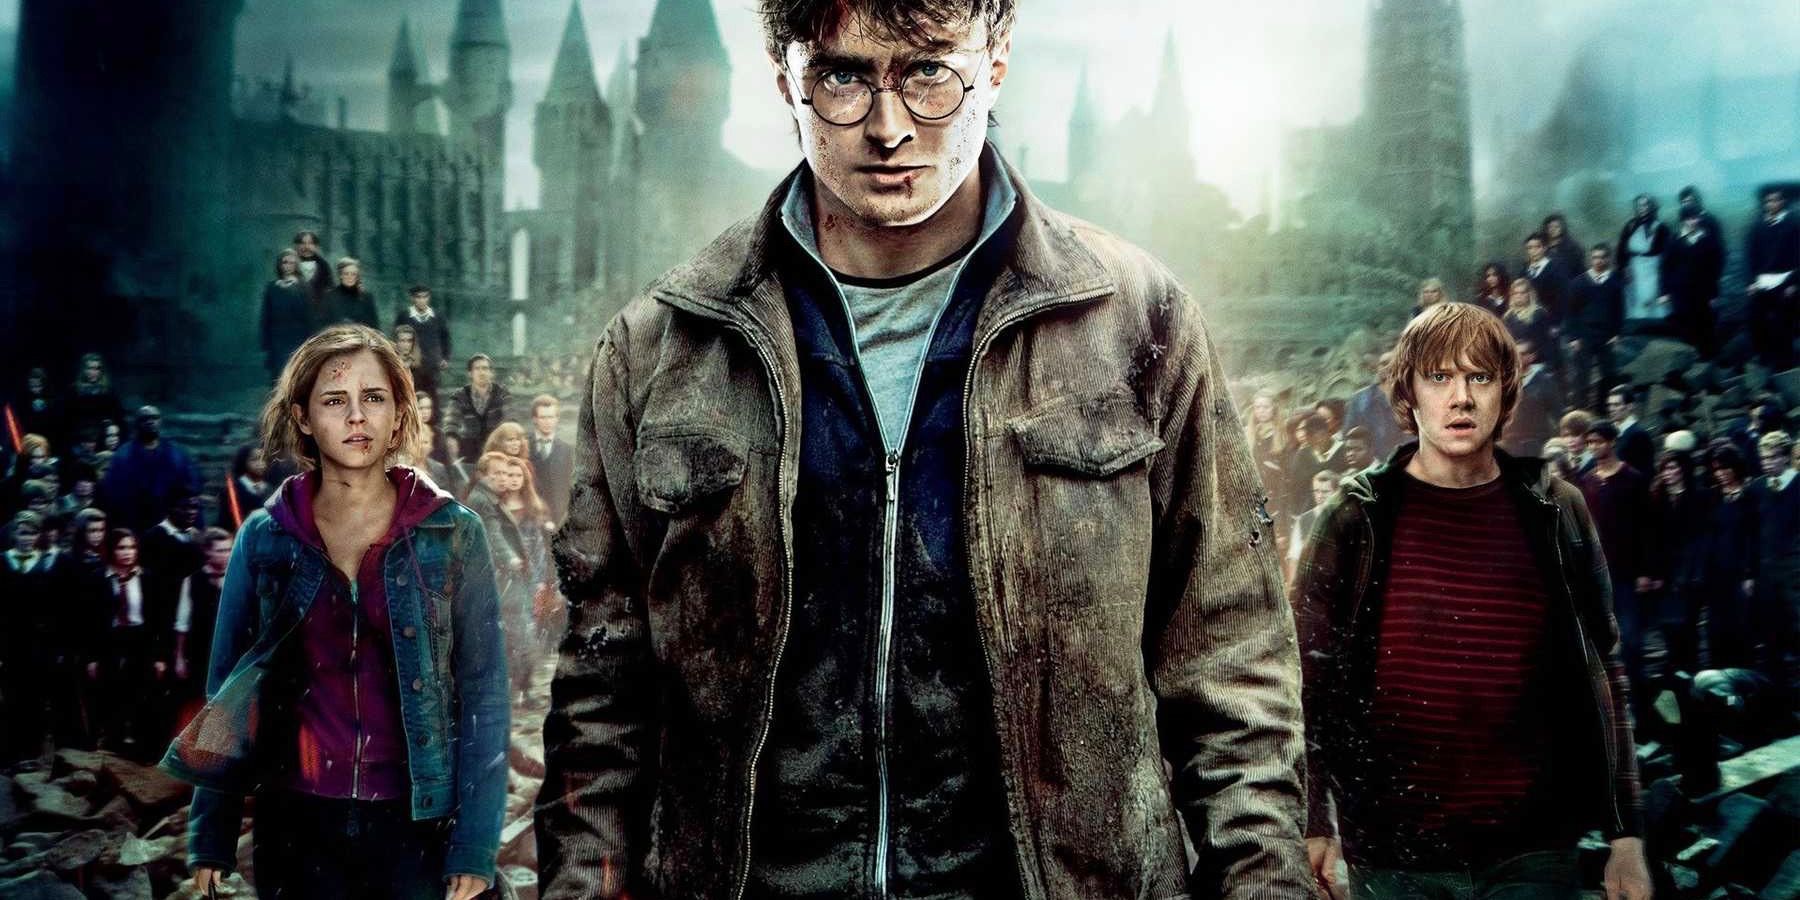 Hermione, Harry, and Ron on the poster of Harry Potter and the Deathly Hallows Part 2